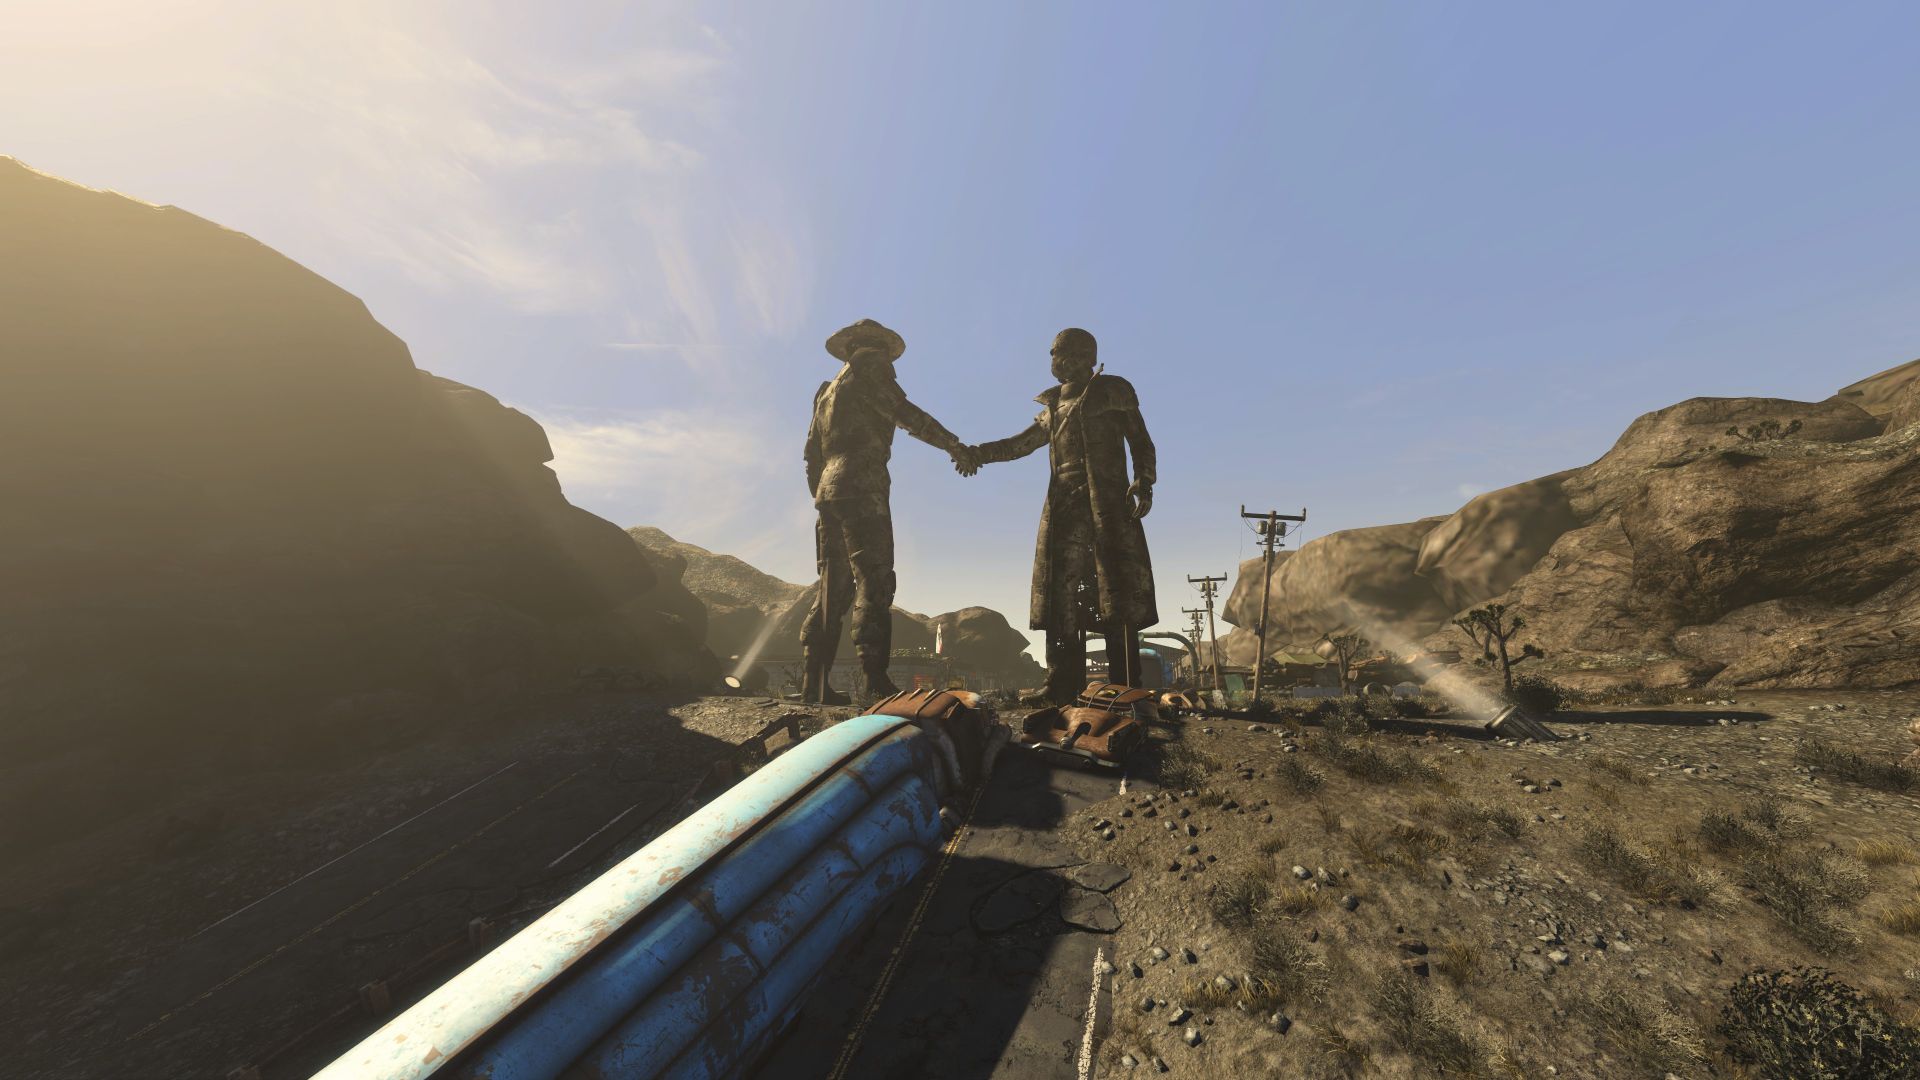 This mod brings Fallout New Vegas to Fallout 4